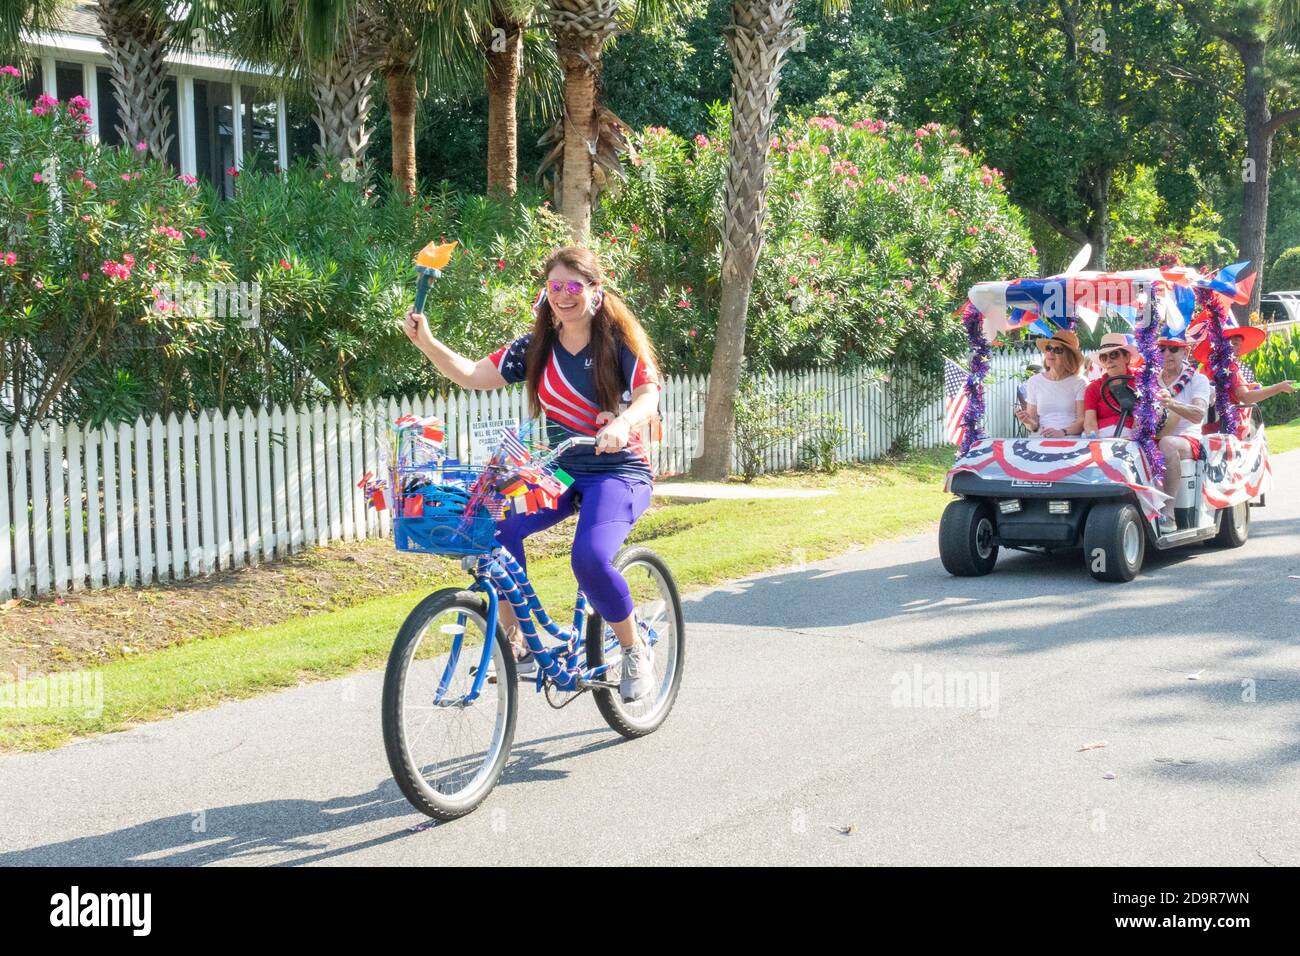 Decorated golf carts and costumed bicyclists ride down the road during the annual Independence Day parade July 4, 2019 in Sullivan's Island, South Carolina. The tiny affluent Sea Island beach community across from Charleston holds an outsized golf cart parade featuring more than 75 decorated carts. Stock Photo